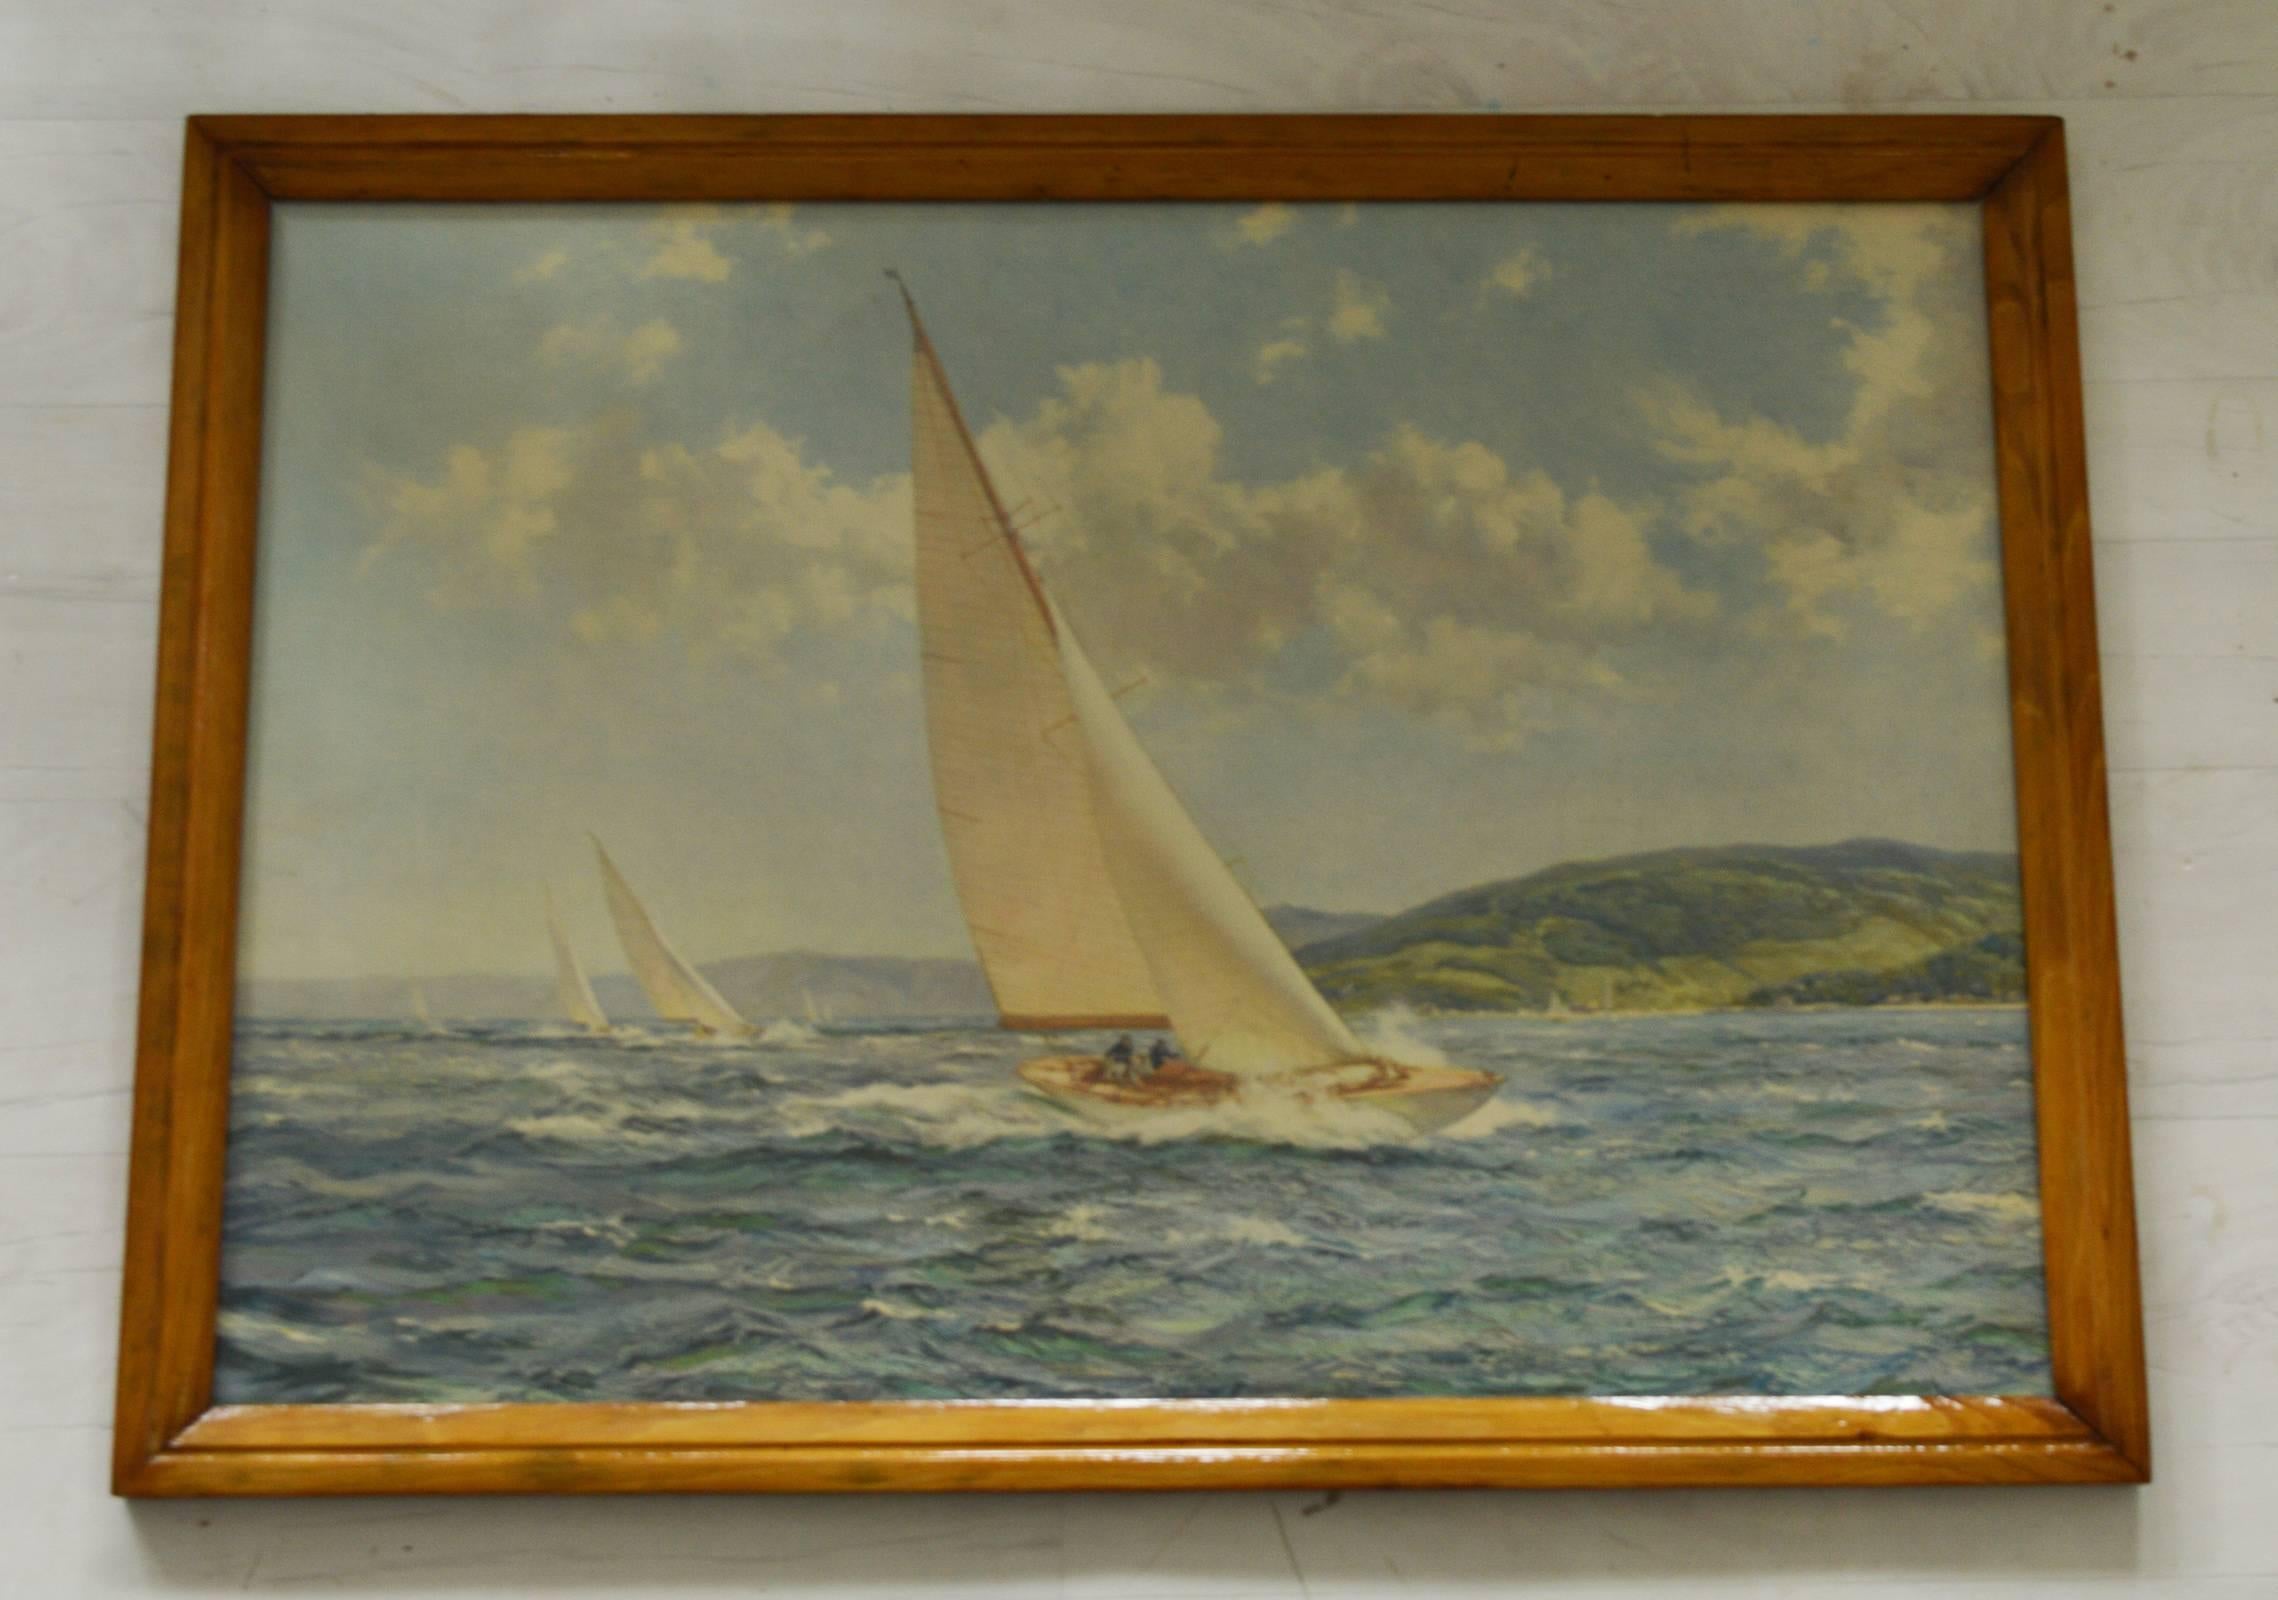 
Great yachting print in an antique varnished pine frame.

Lithograph on card most likely Published by The Medici Society 1930-1950.

The measurement given below is the frame size.